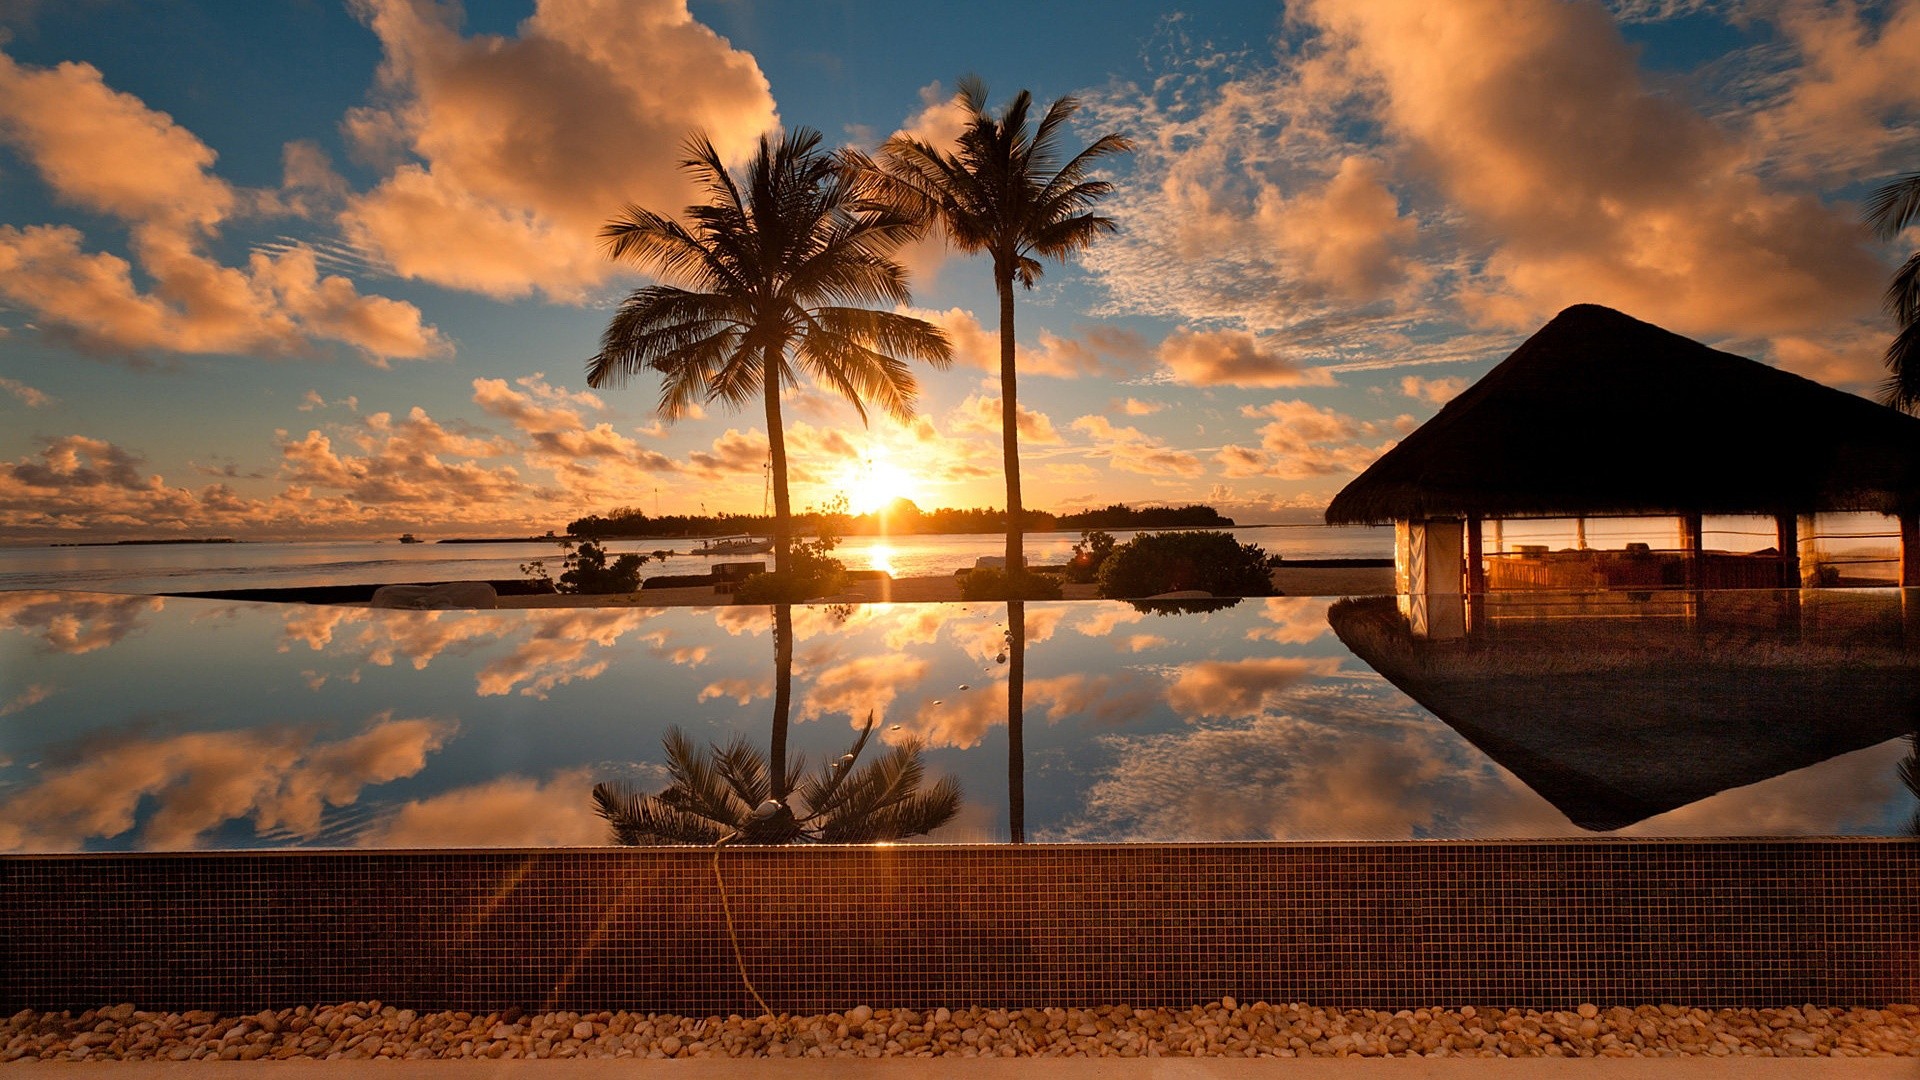 General 1920x1080 dusk water hut swimming pool sunset sky sunlight reflection palm trees